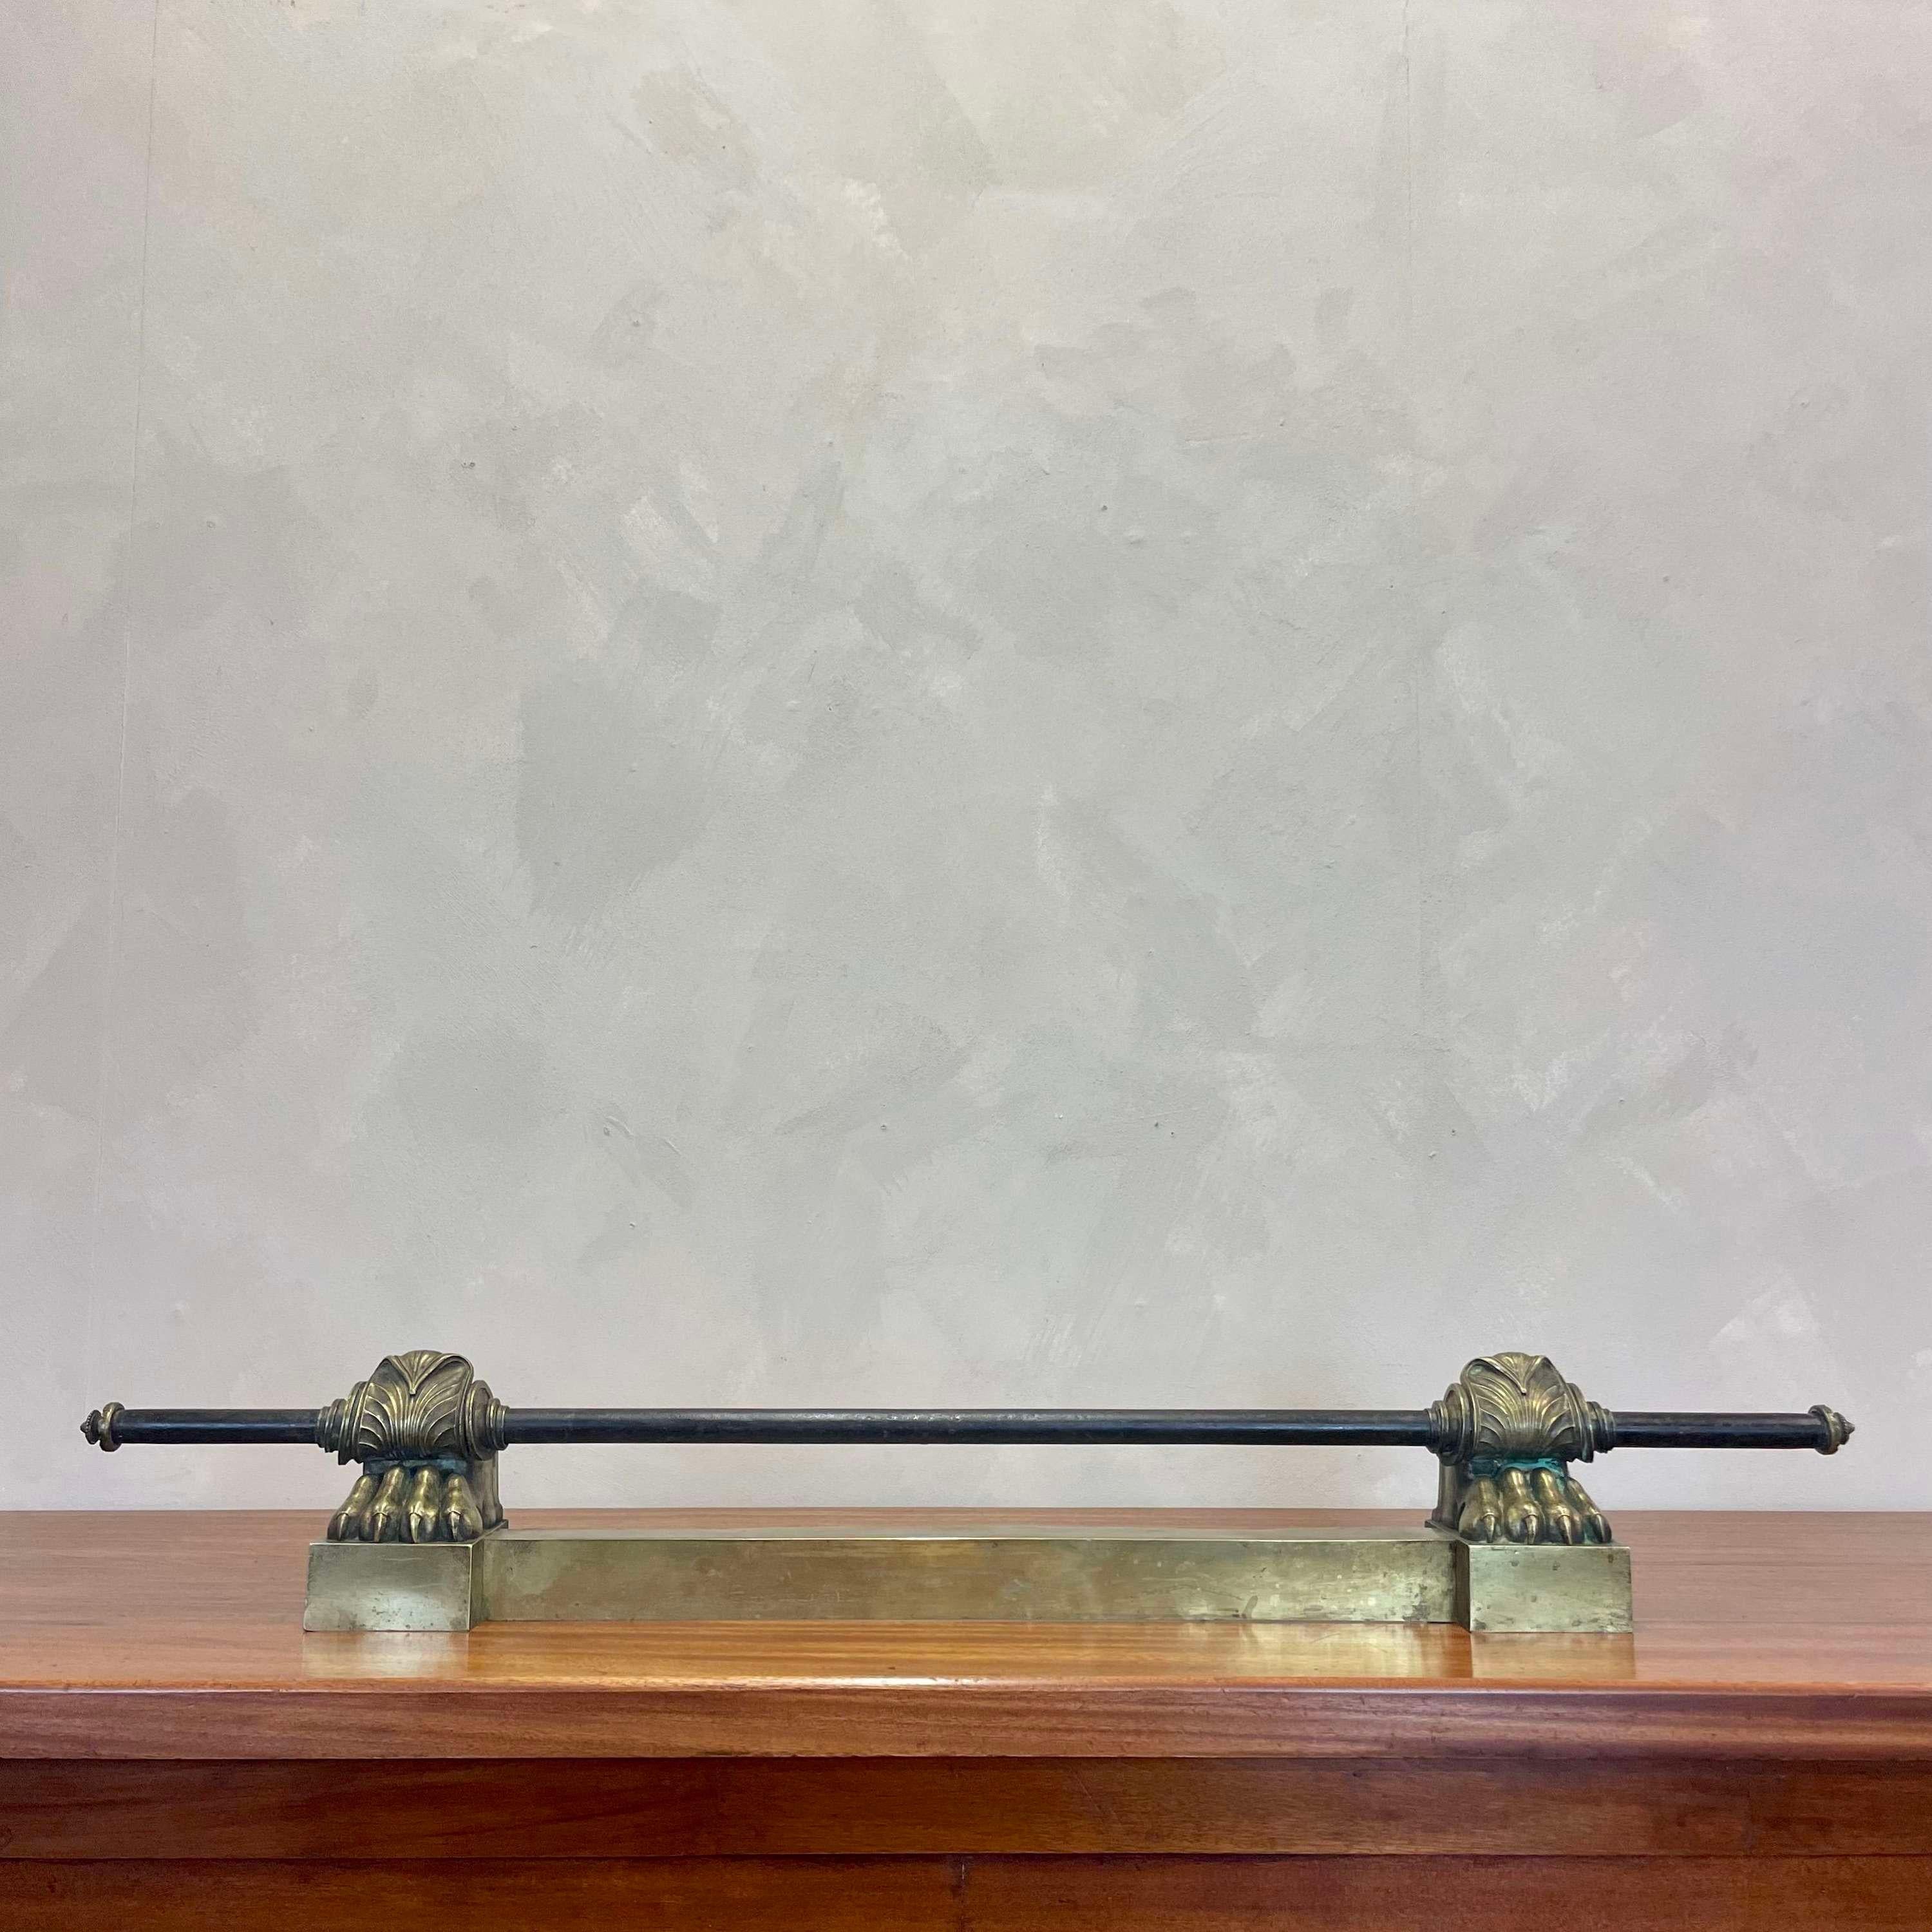 Stunning French 19th century, brass fire fender rail.
Elegant brass lion paw supports, with scrolled detail either side 
A perfect addition to any style of fireplace that's not to overpowering in the room 
Could also easily be wall mounted as a